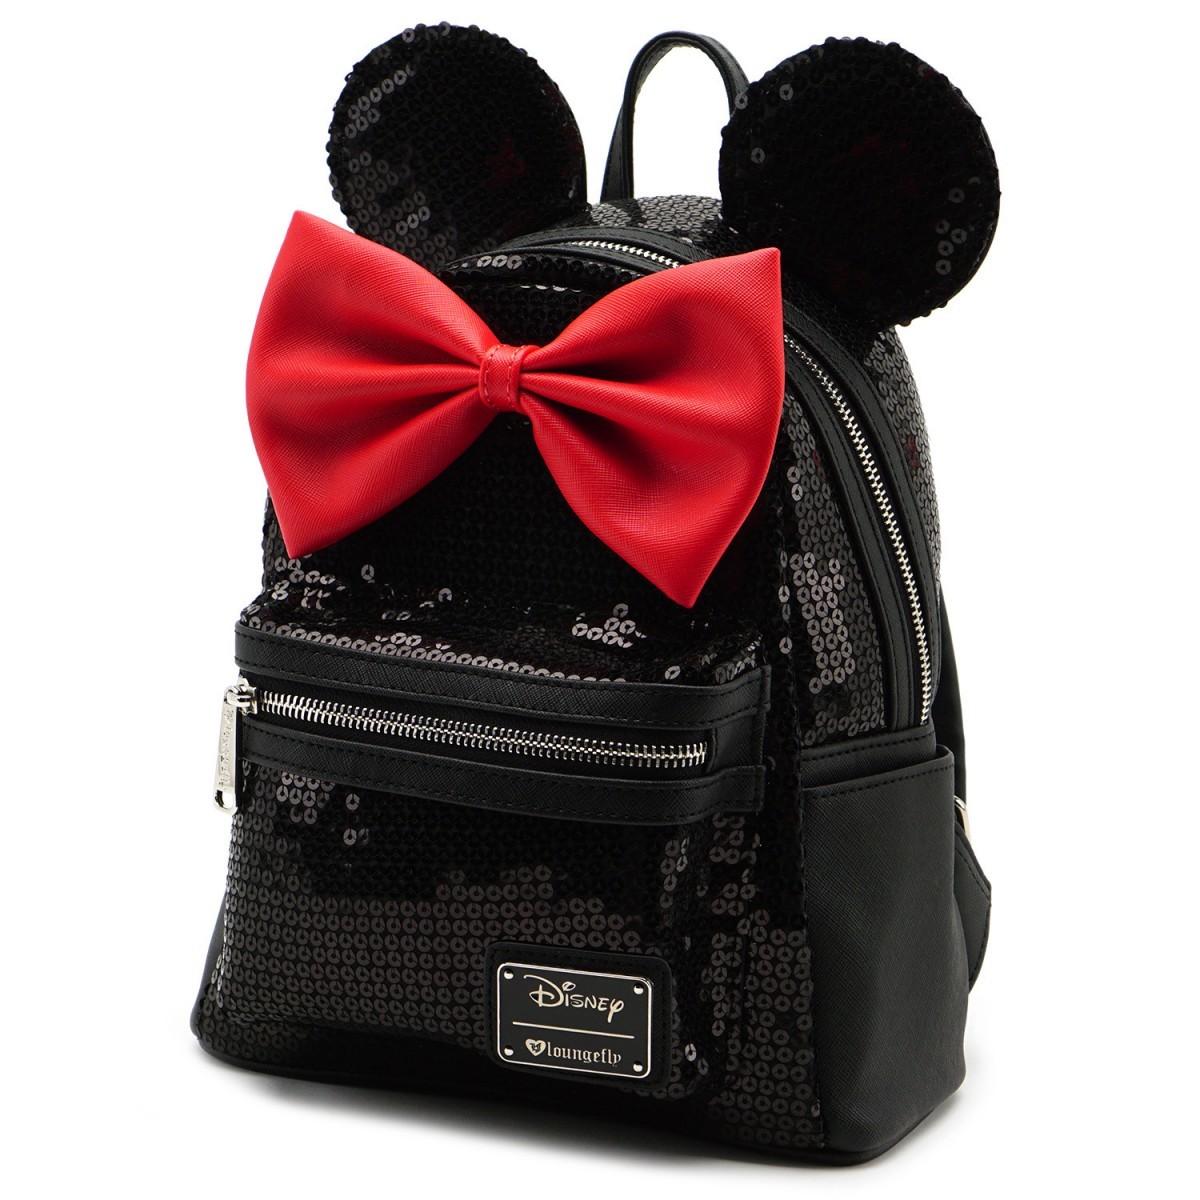 Loungefly Disney Minnie Mouse - Minnie Black Sequin Mini Backpack